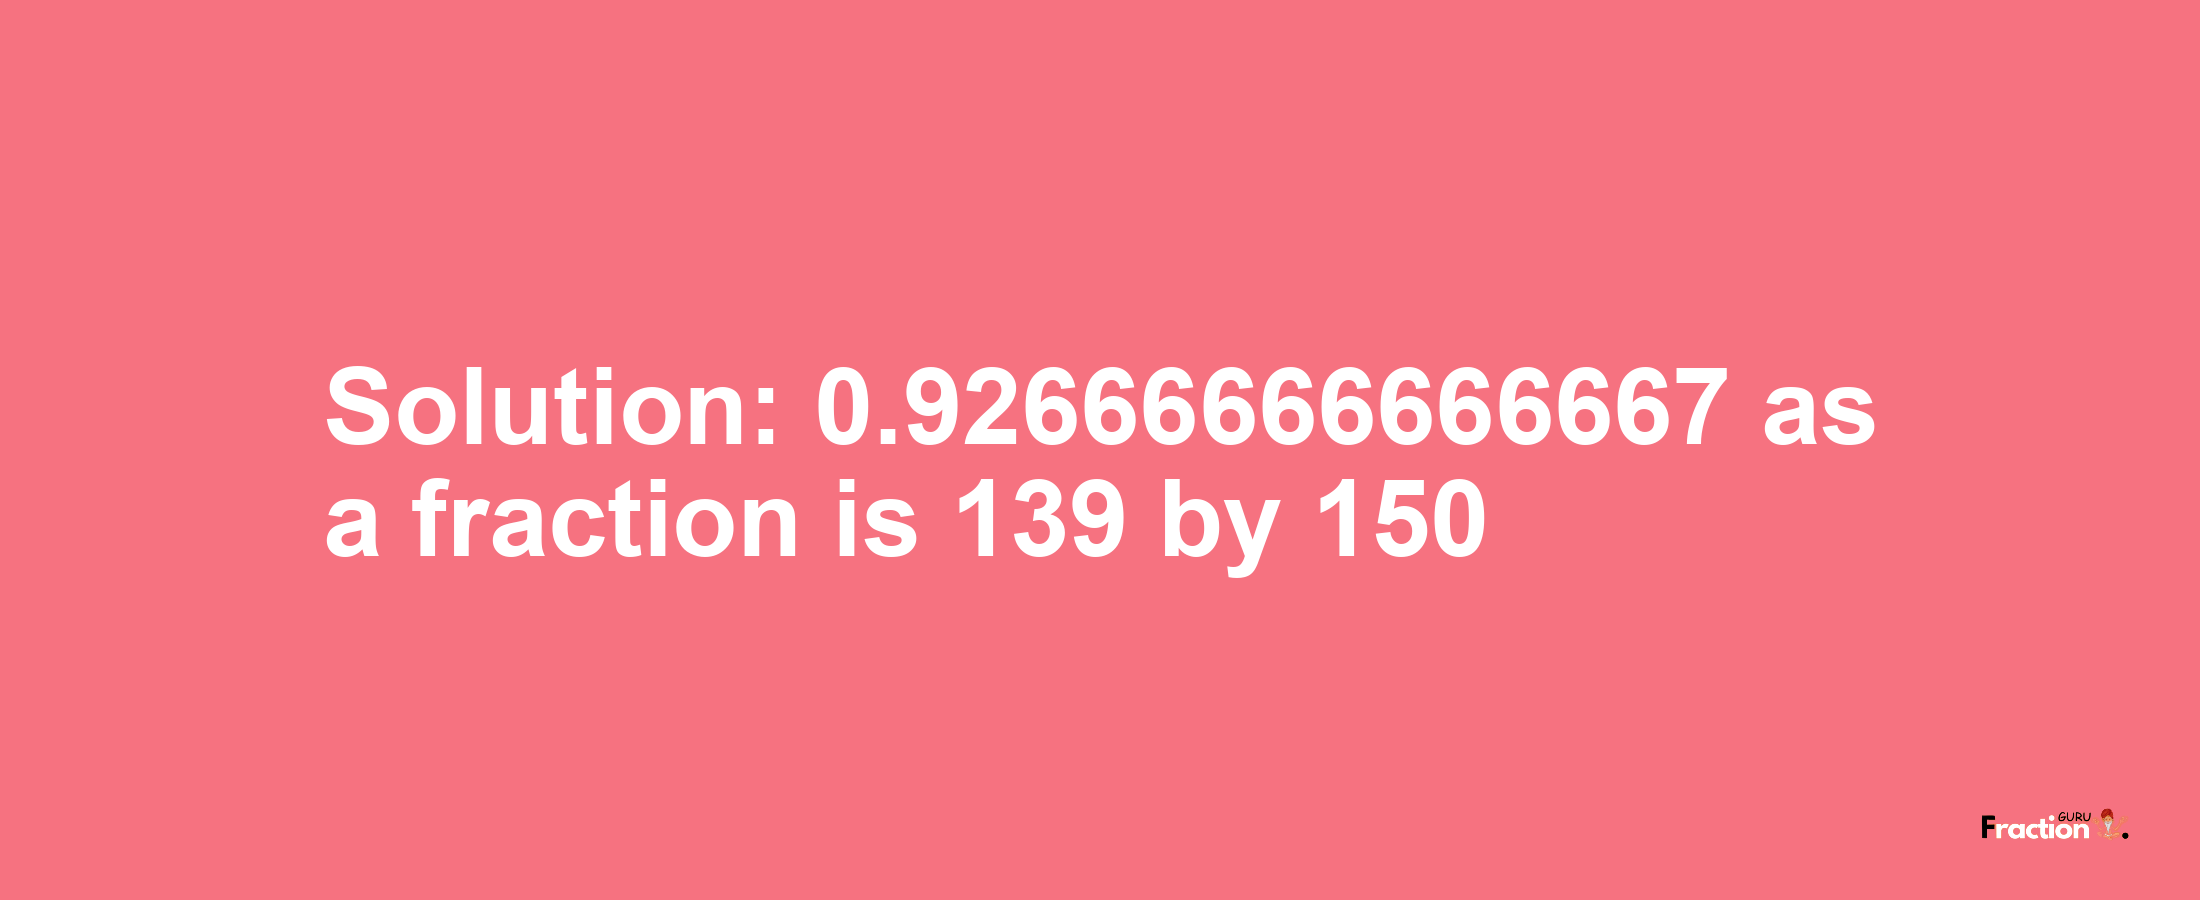 Solution:0.92666666666667 as a fraction is 139/150